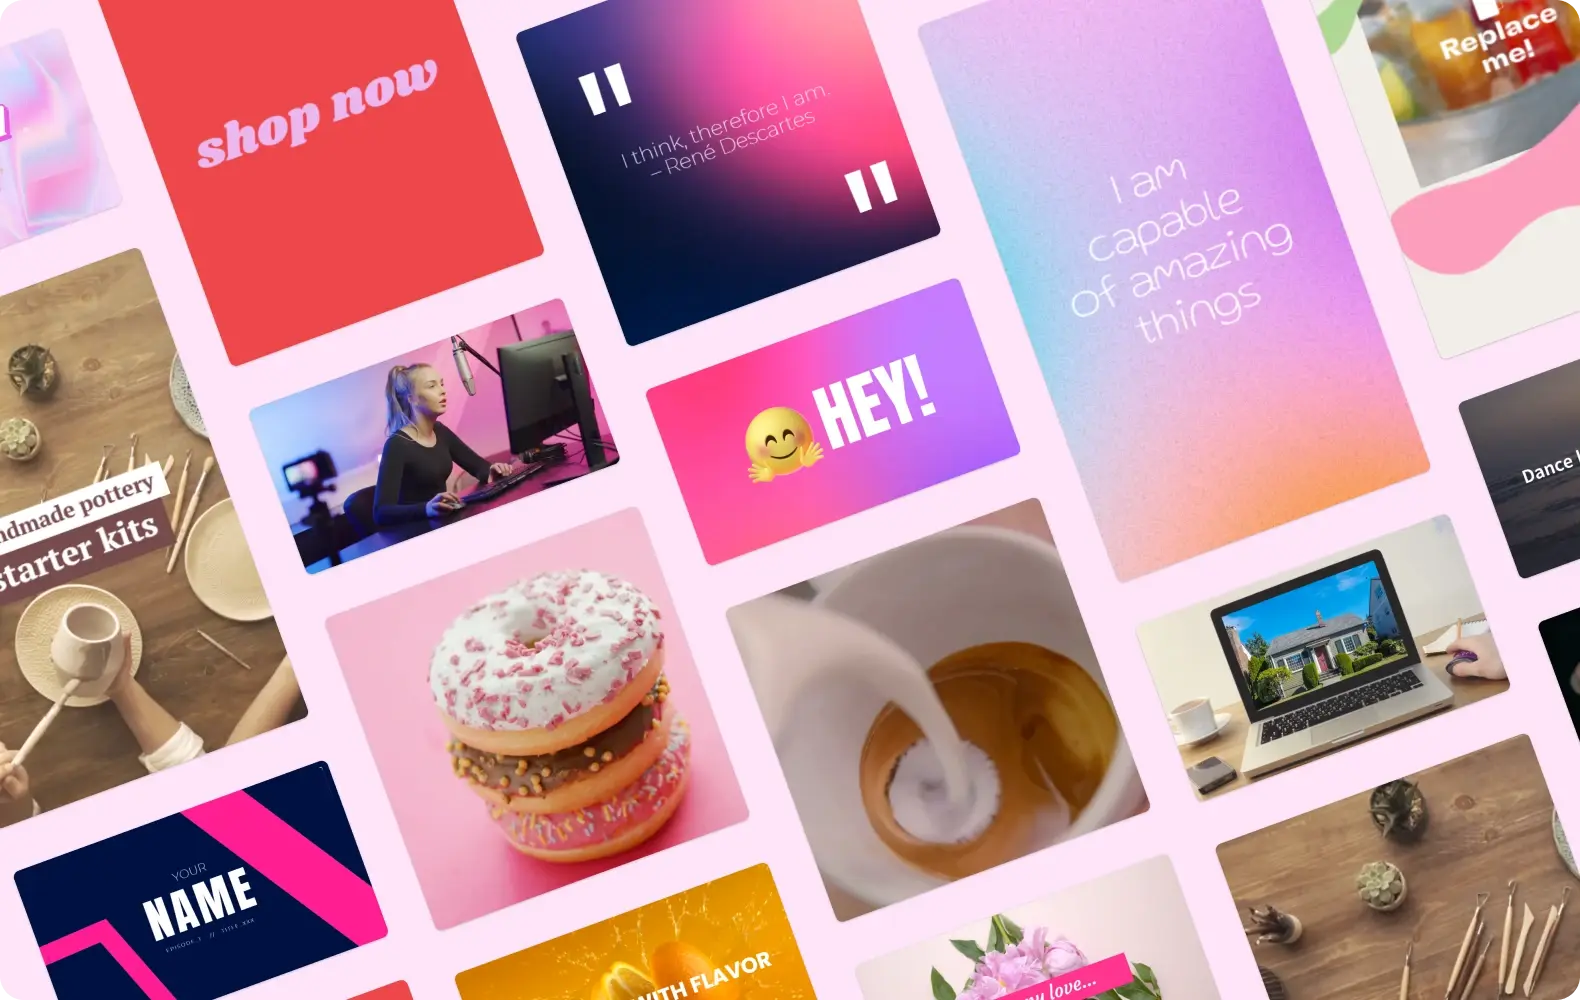 Thumbnail images for Instagram templates from Microsoft Create.